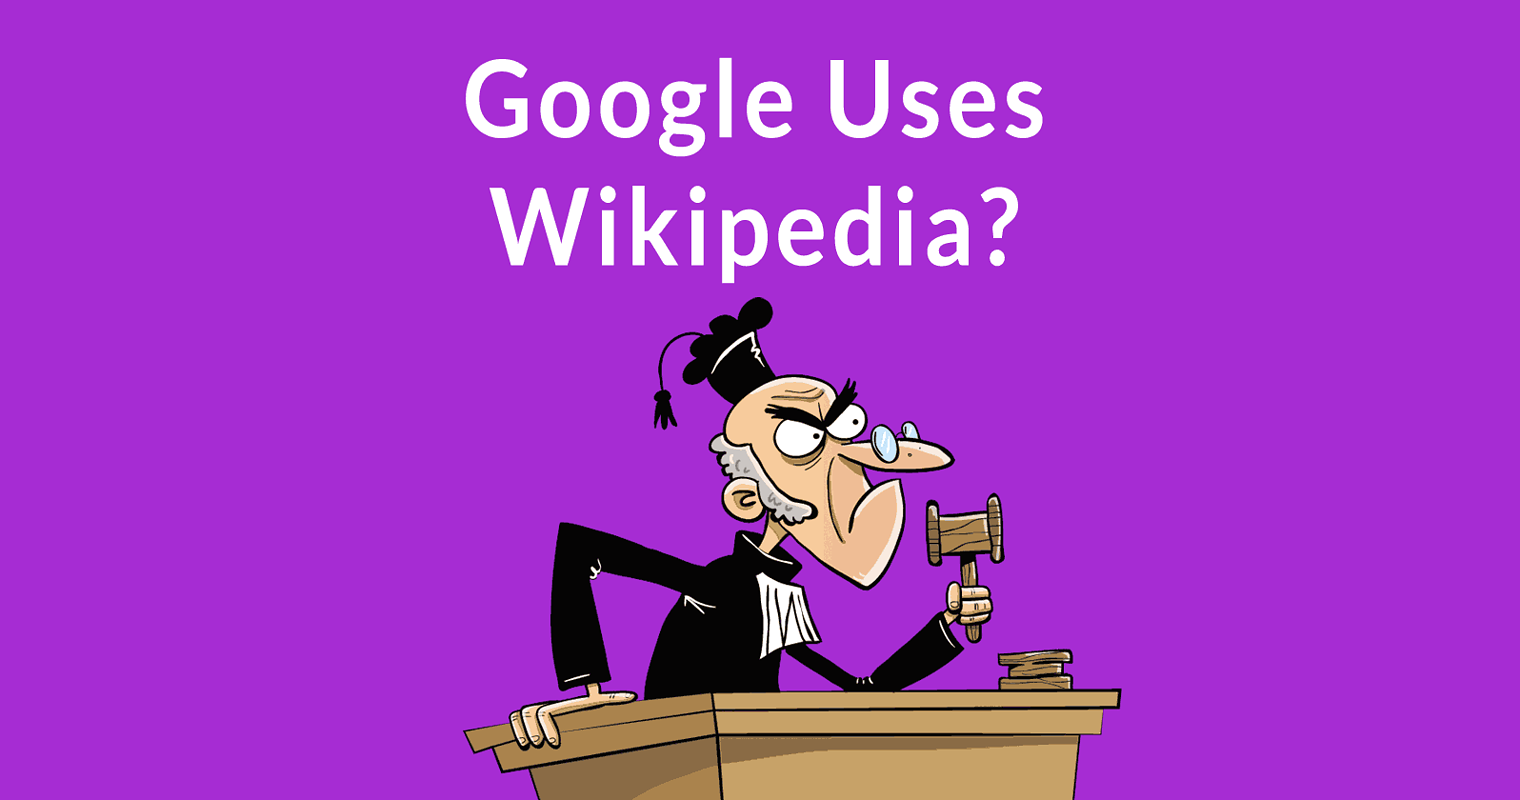 Is Google June Update Using Wikipedia to Judge Sites?